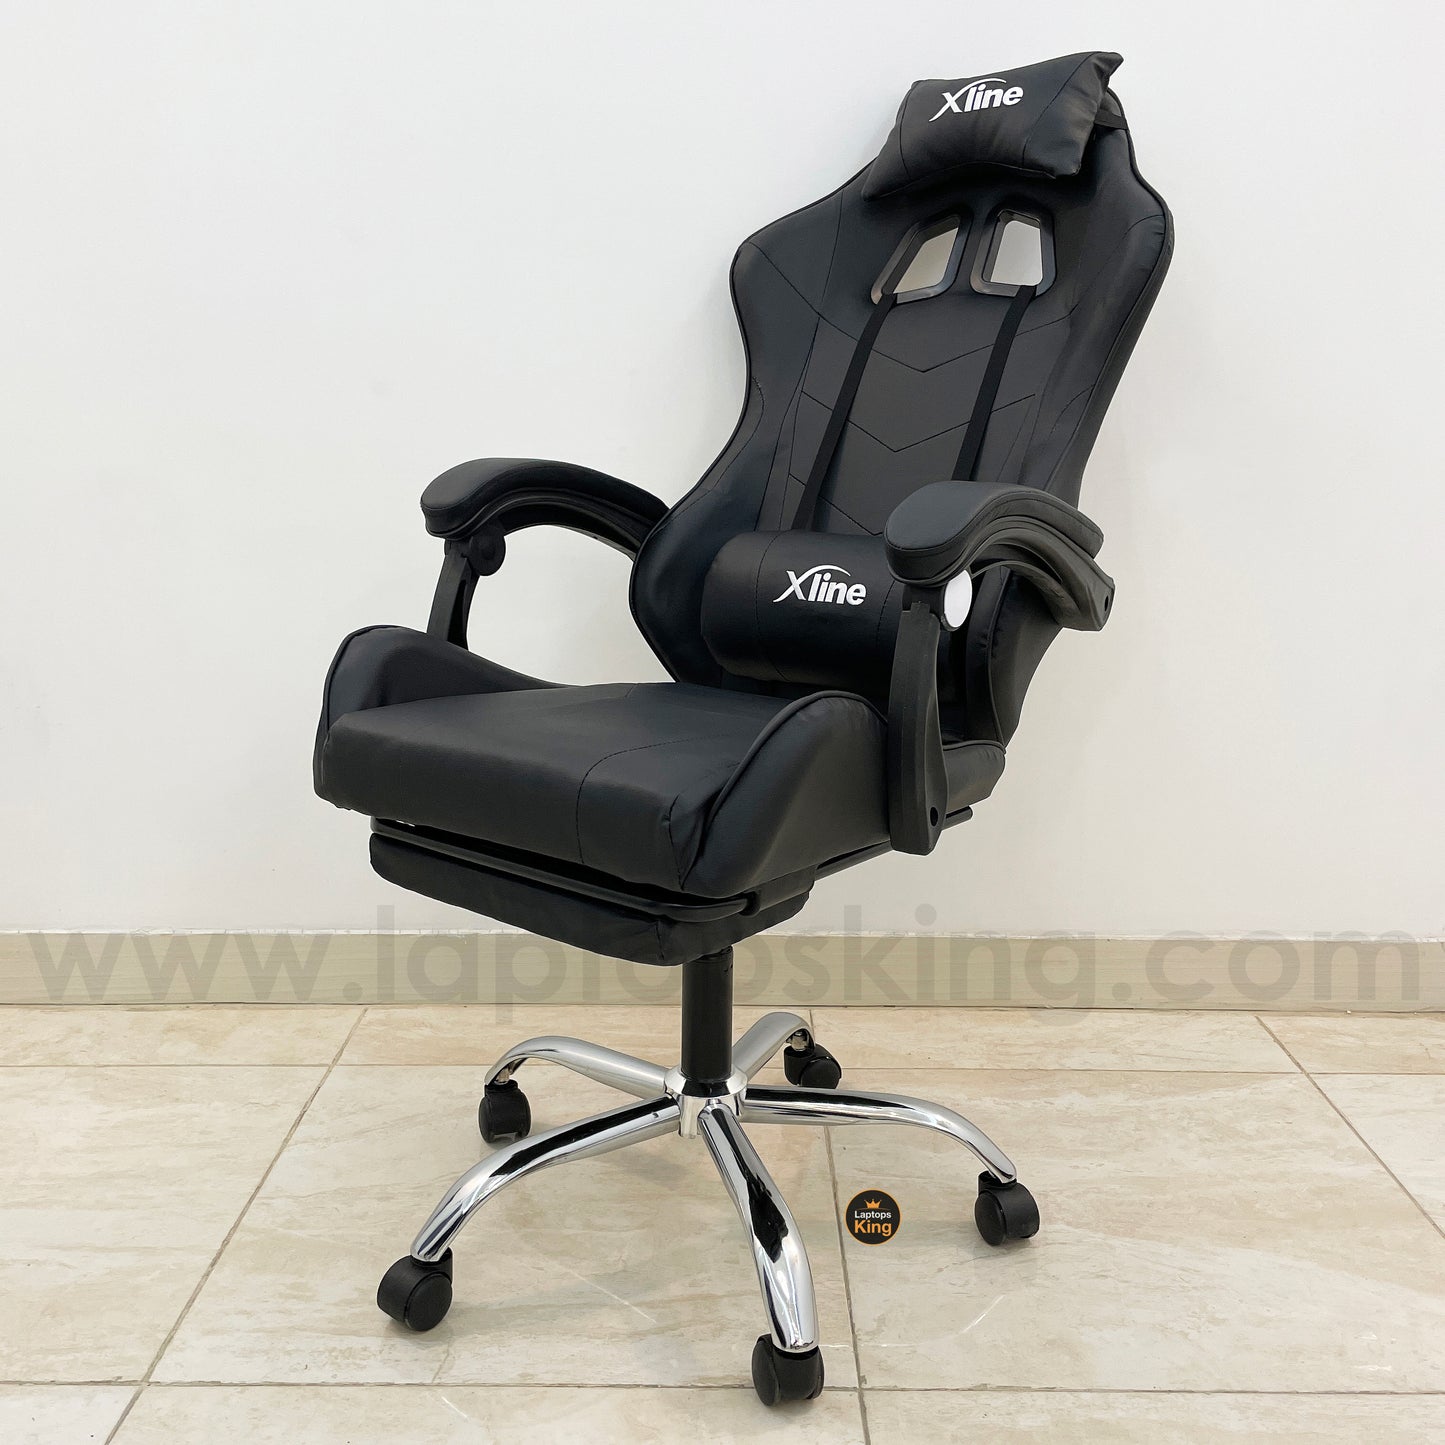 Xline X920 Gaming Chair (Brand New)